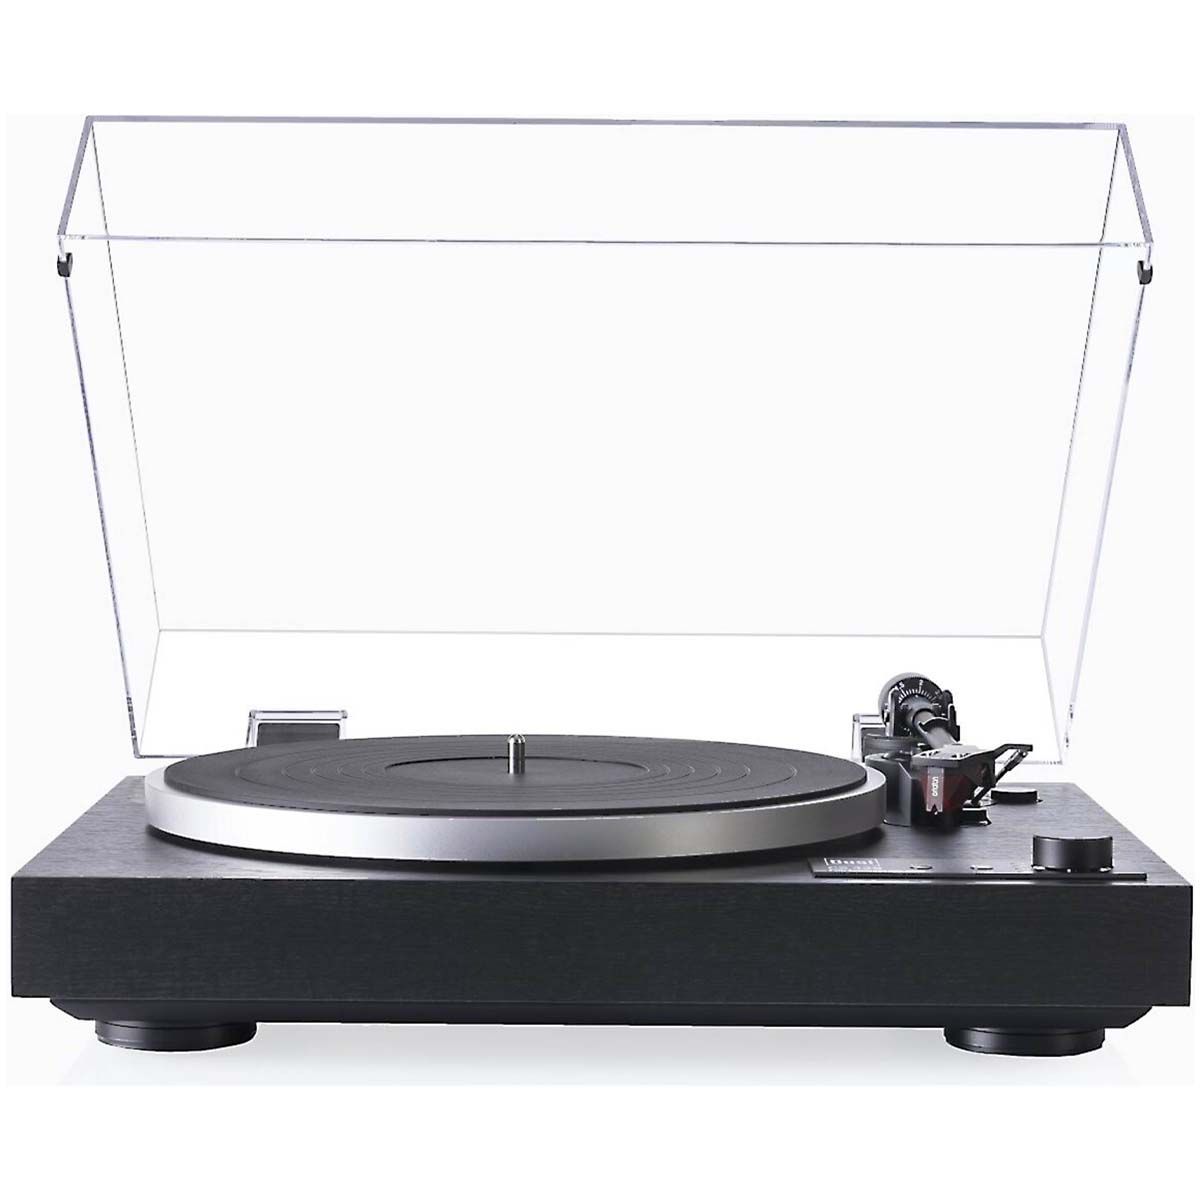 Dual CS429 Fully Automatic HiFi Turntable - front view